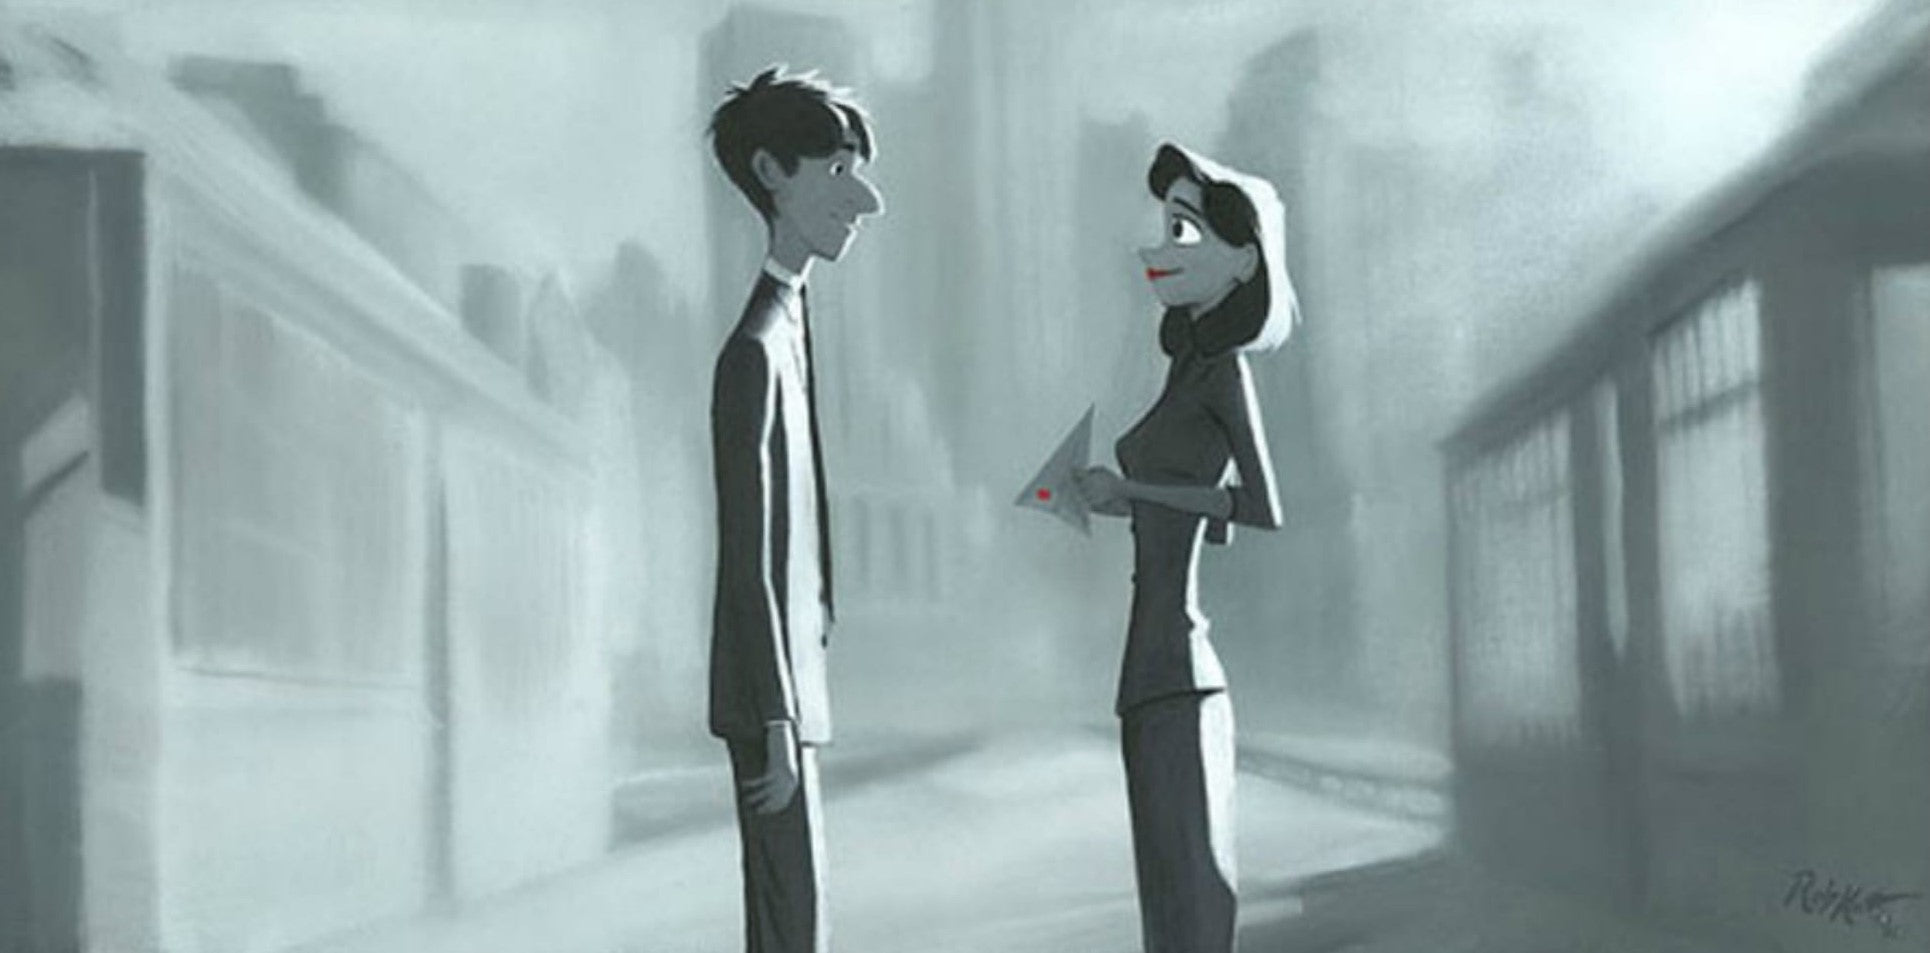 And Then I Found You by Rob Kaz inspired by Paperman